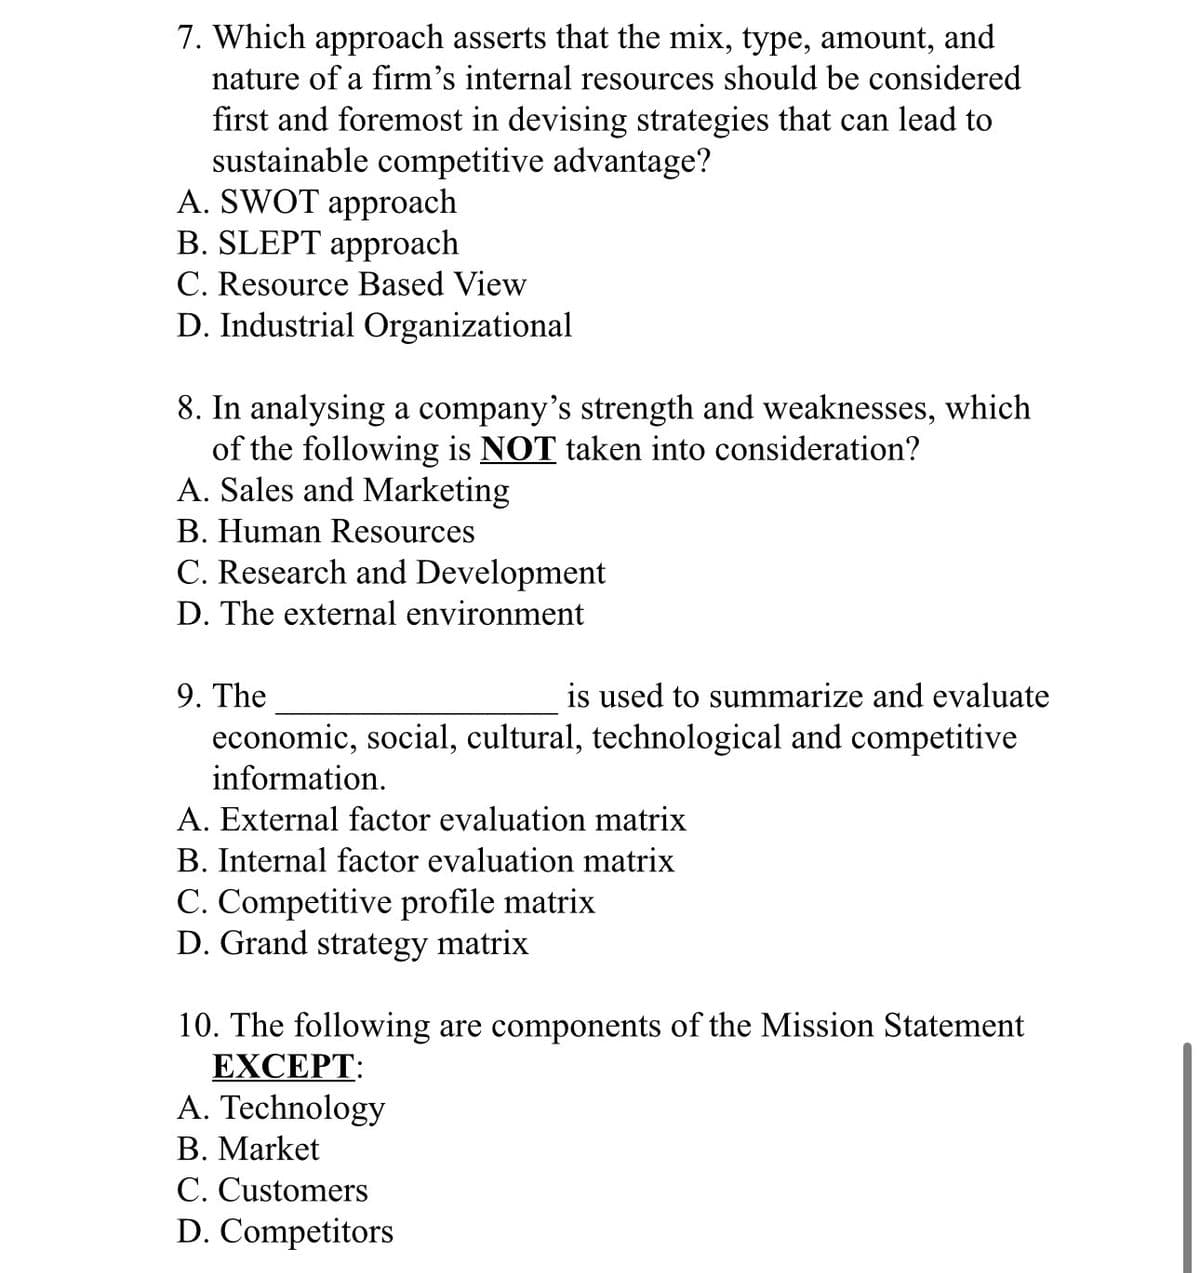 7. Which approach asserts that the mix, type, amount, and
nature of a firm's internal resources should be considered
first and foremost in devising strategies that can lead to
sustainable competitive advantage?
A. SWOT approach
B. SLEPT approach
C. Resource Based View
D. Industrial Organizational
8. In analysing a company's strength and weaknesses, which
of the following is NOT taken into consideration?
A. Sales and Marketing
B. Human Resources
C. Research and Development
D. The external environment
9. The
is used to summarize and evaluate
economic, social, cultural, technological and competitive
information.
A. External factor evaluation matrix
B. Internal factor evaluation matrix
C. Competitive profile matrix
D. Grand strategy matrix
10. The following are components of the Mission Statement
EXCEPT:
A. Technology
B. Market
C. Customers
D. Competitors